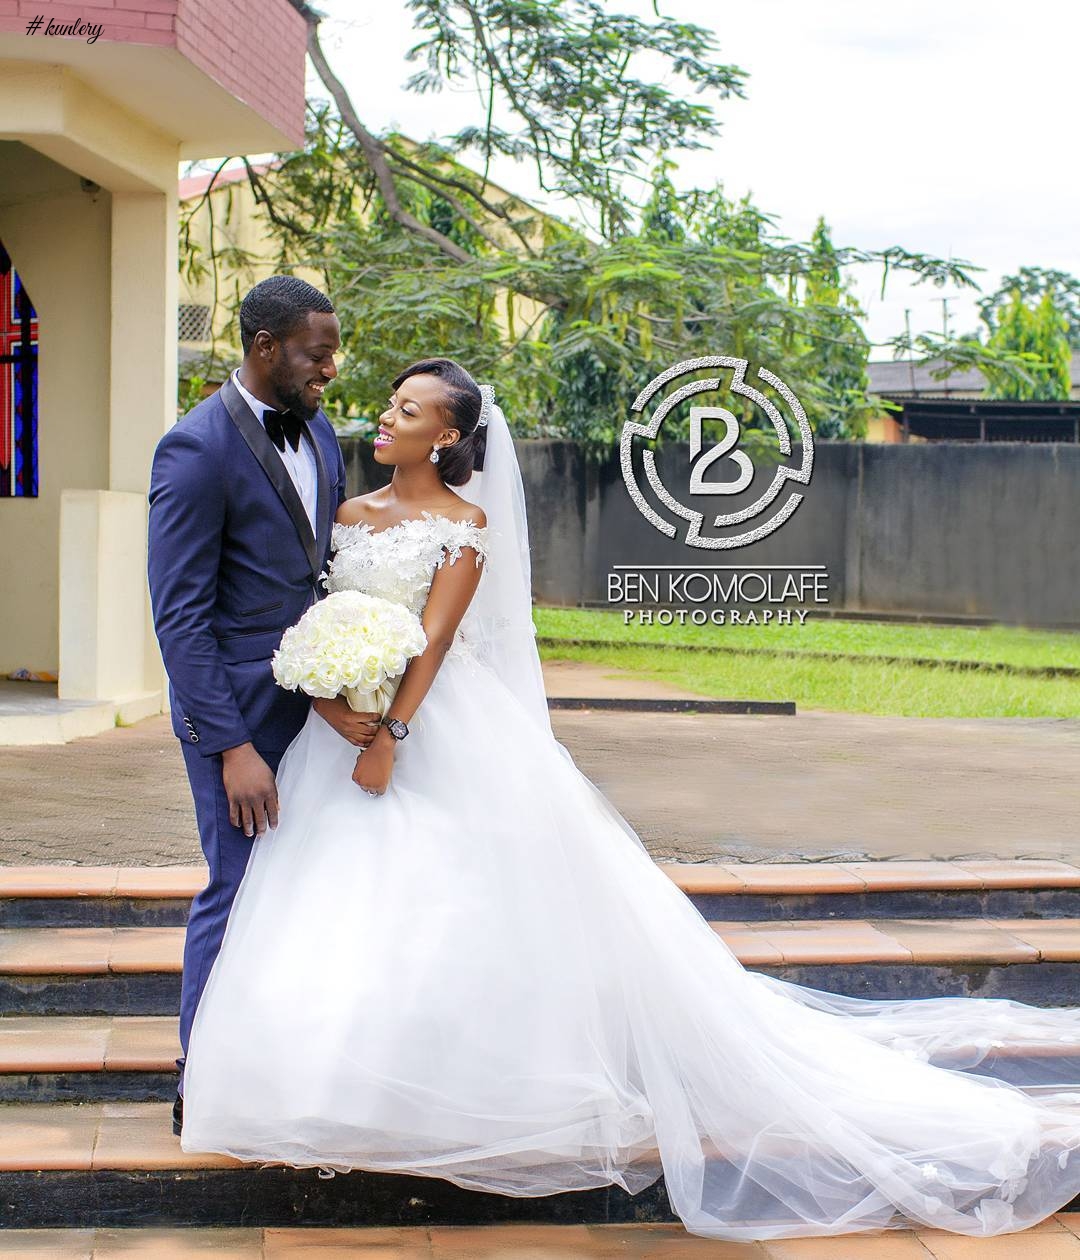 SEE THE IJAW TRADITIONAL WEDDING OF BIANCA AND OGBU